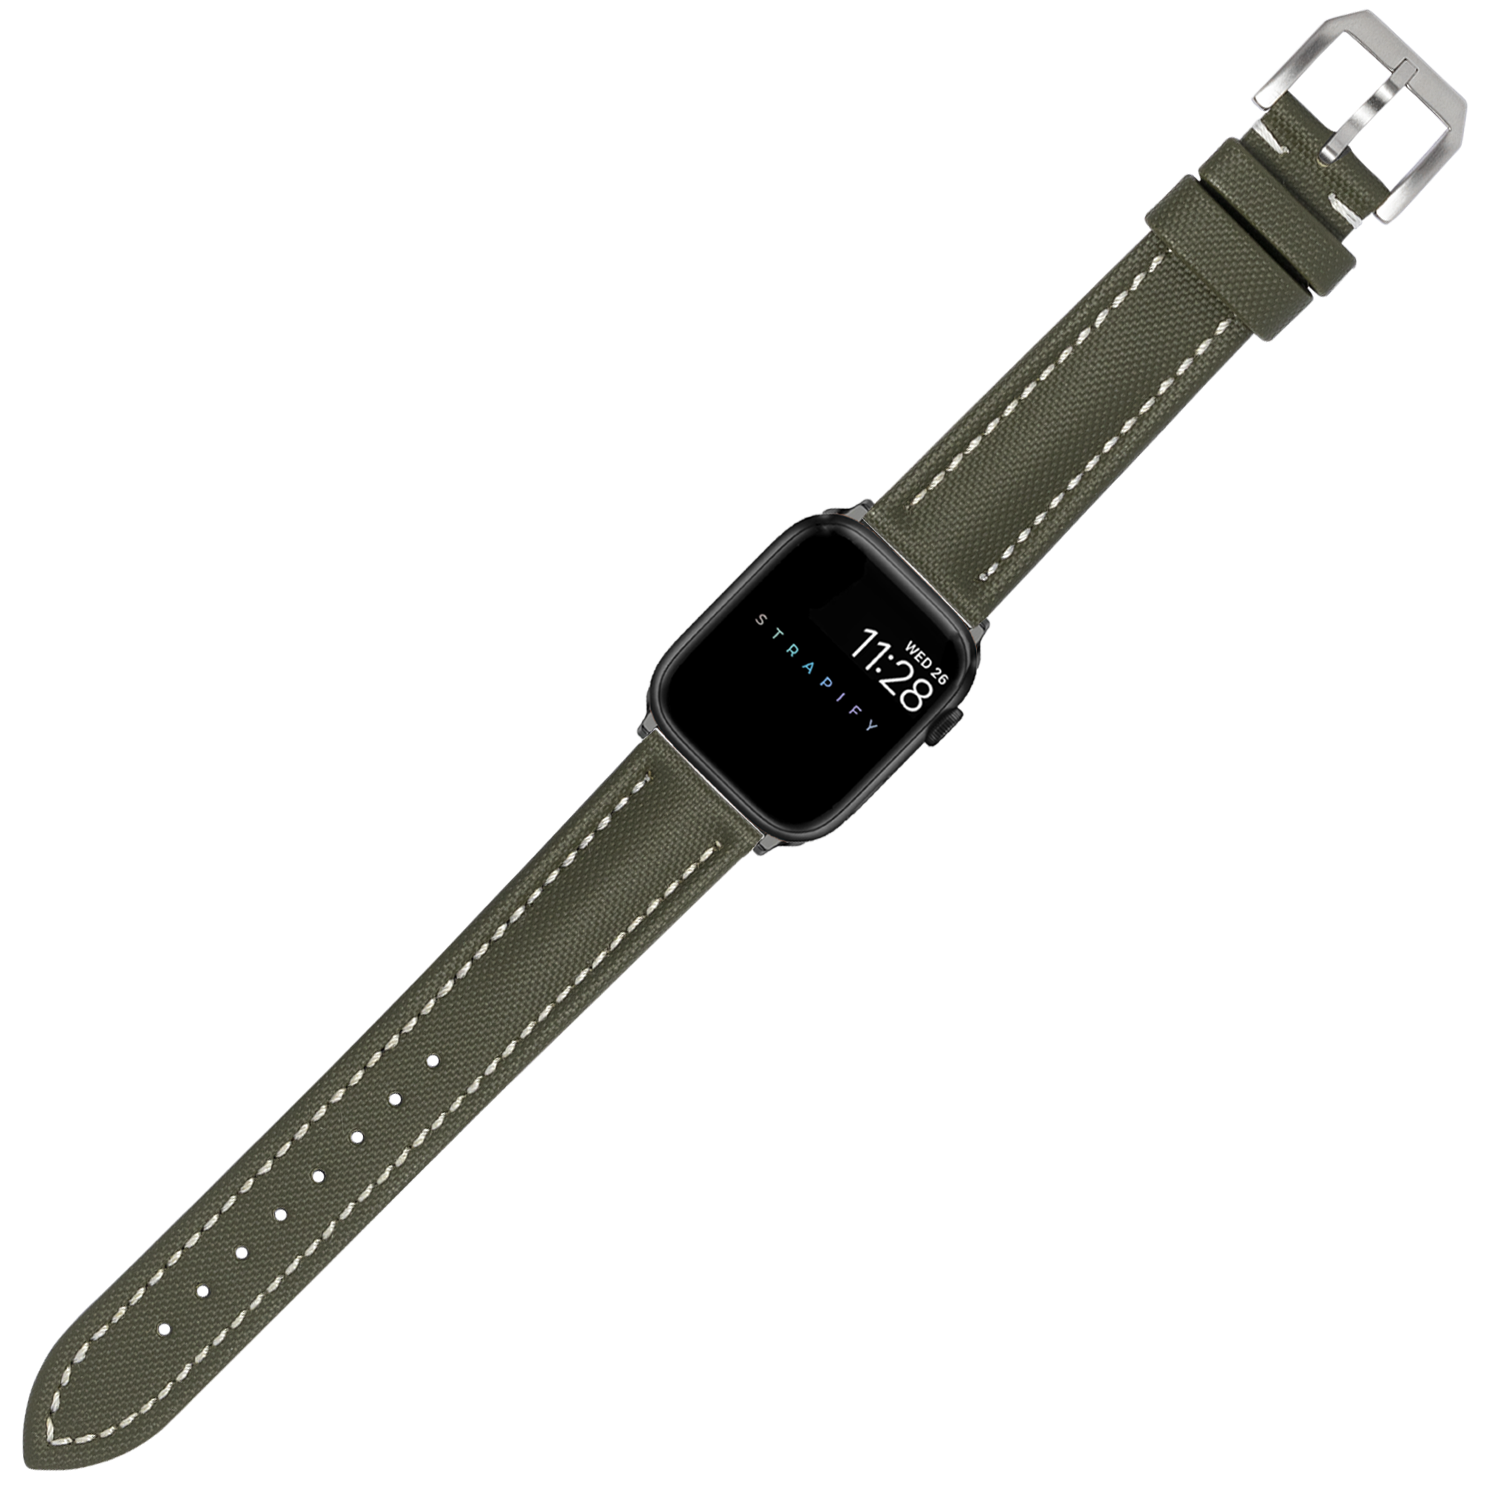 [Apple Watch] King Sailcloth - Army Green with White Stitching